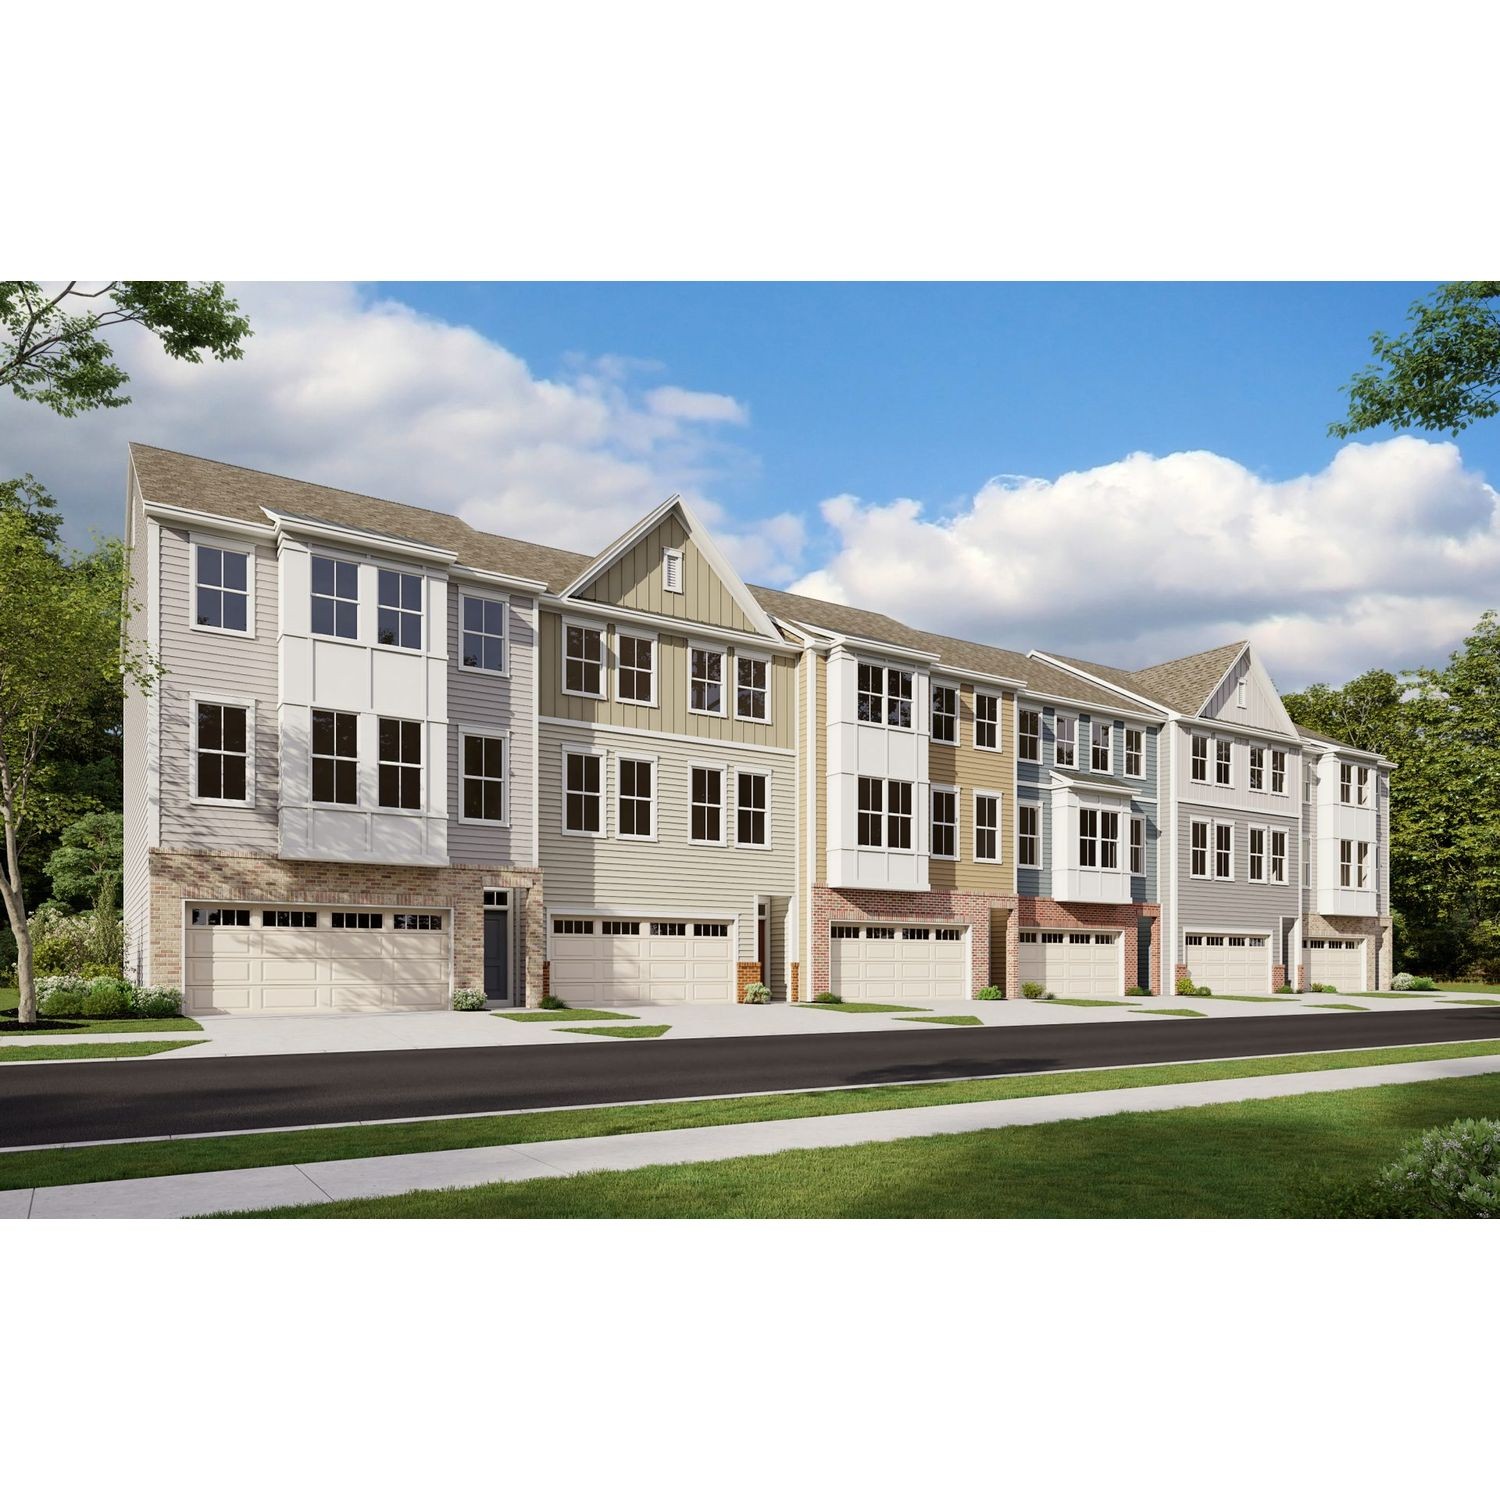 1. Scotland Heights Townhomes